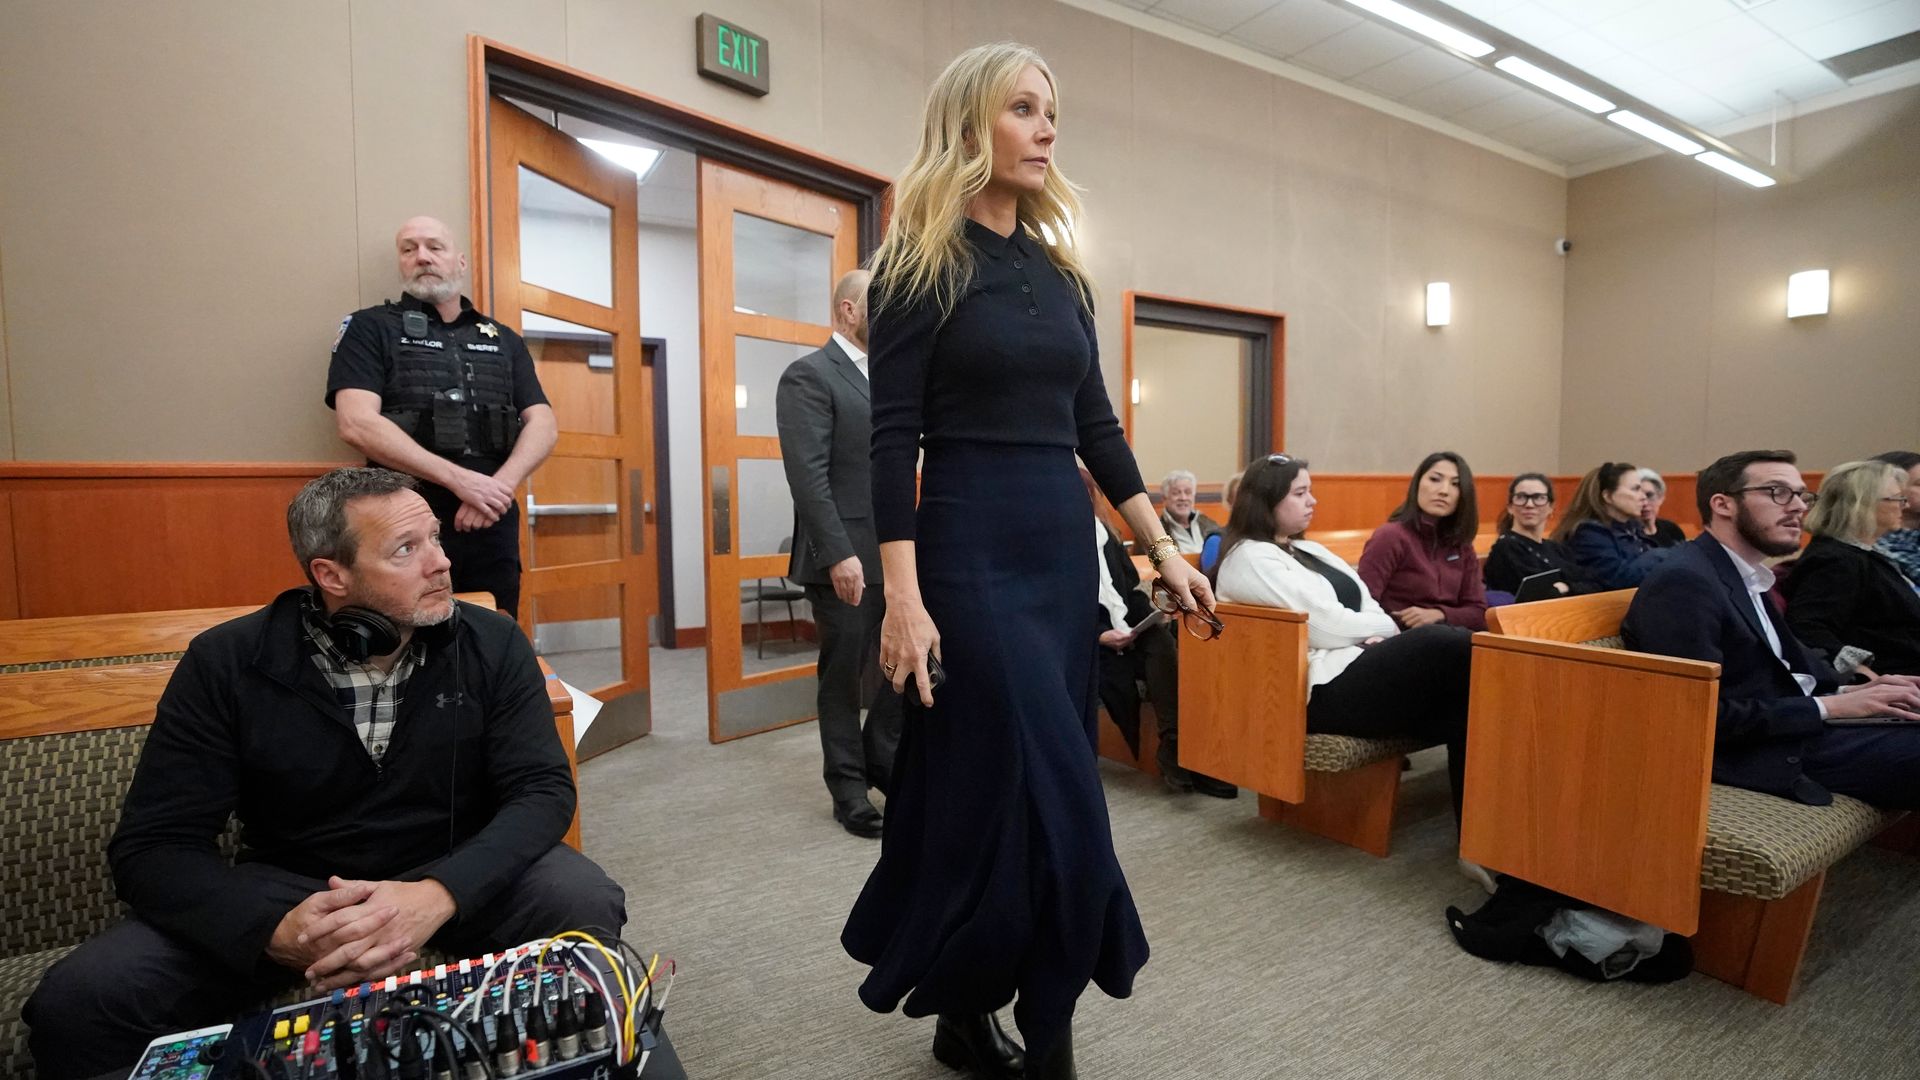 PARK CITY, UTAH - MARCH 24: Actress Gwyneth Paltrow enters the courtroom for her trial on March 24, 2023, in Park City, Utah. Terry Sanderson is suing actress Gwyneth Paltrow for $300,000, claiming she recklessly crashed into him while the two were skiing